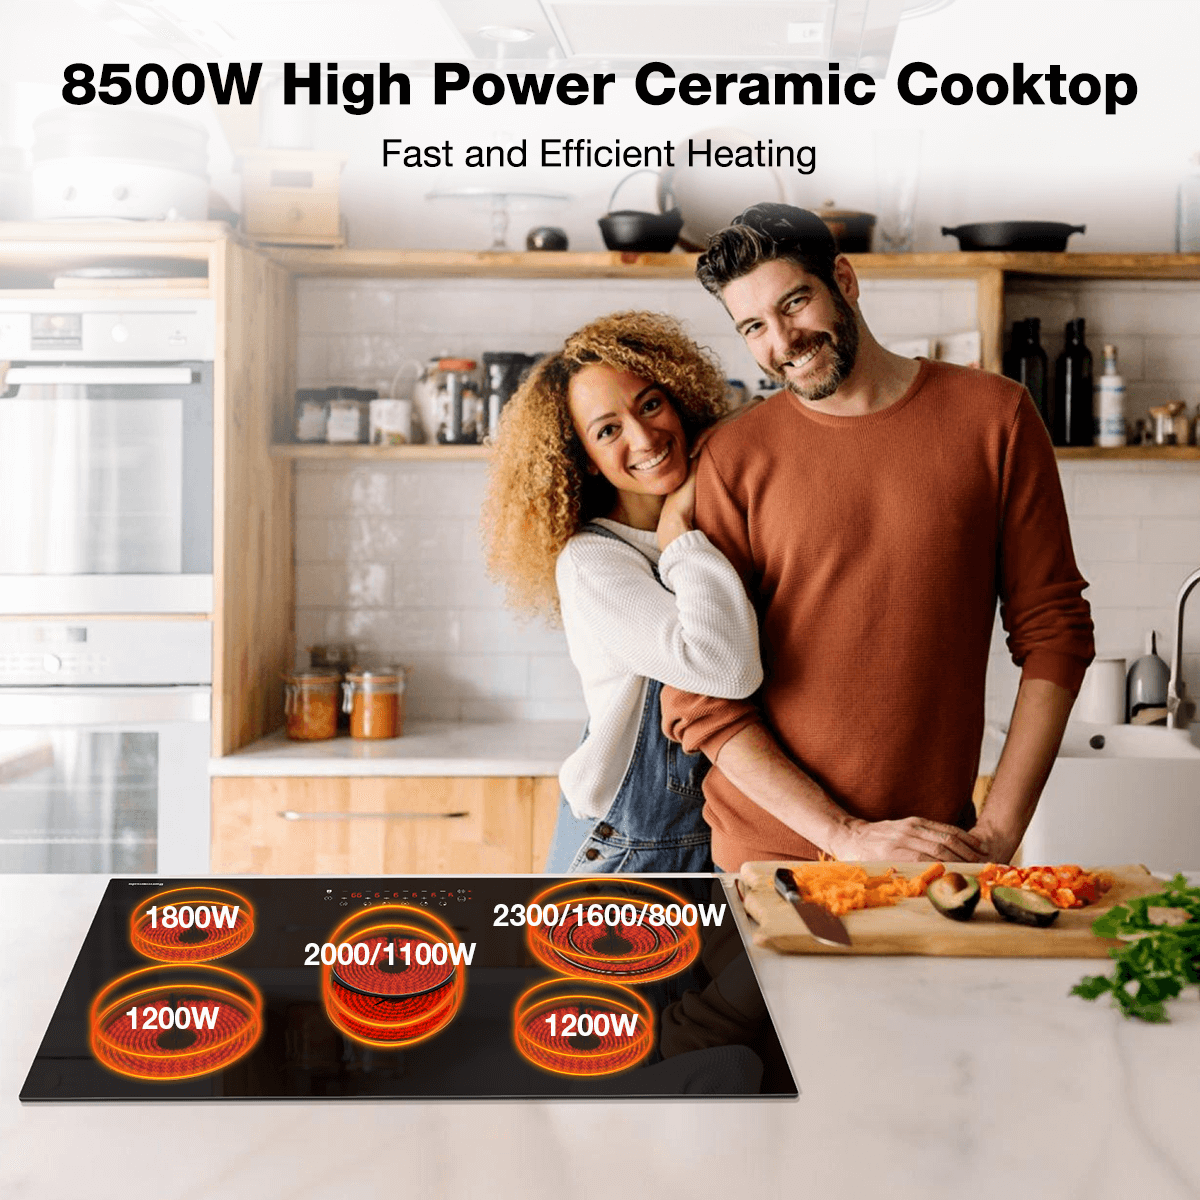 8500W High Power Ceramic Cooktop | Thermomate